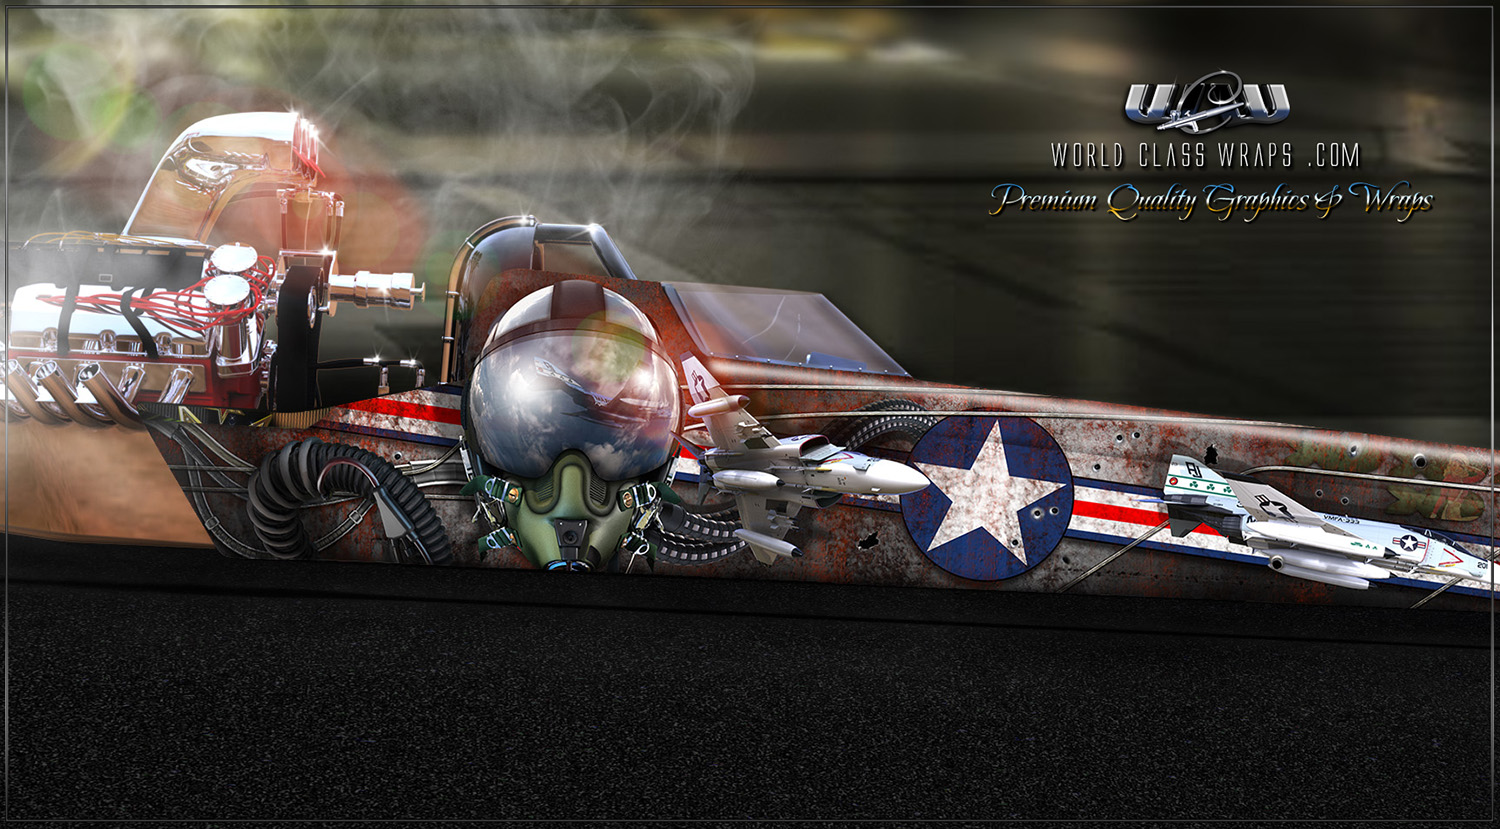 CLOSE-UP RUSTY DRAGSTER F14 PHANTOM DRAGSTER WRAP